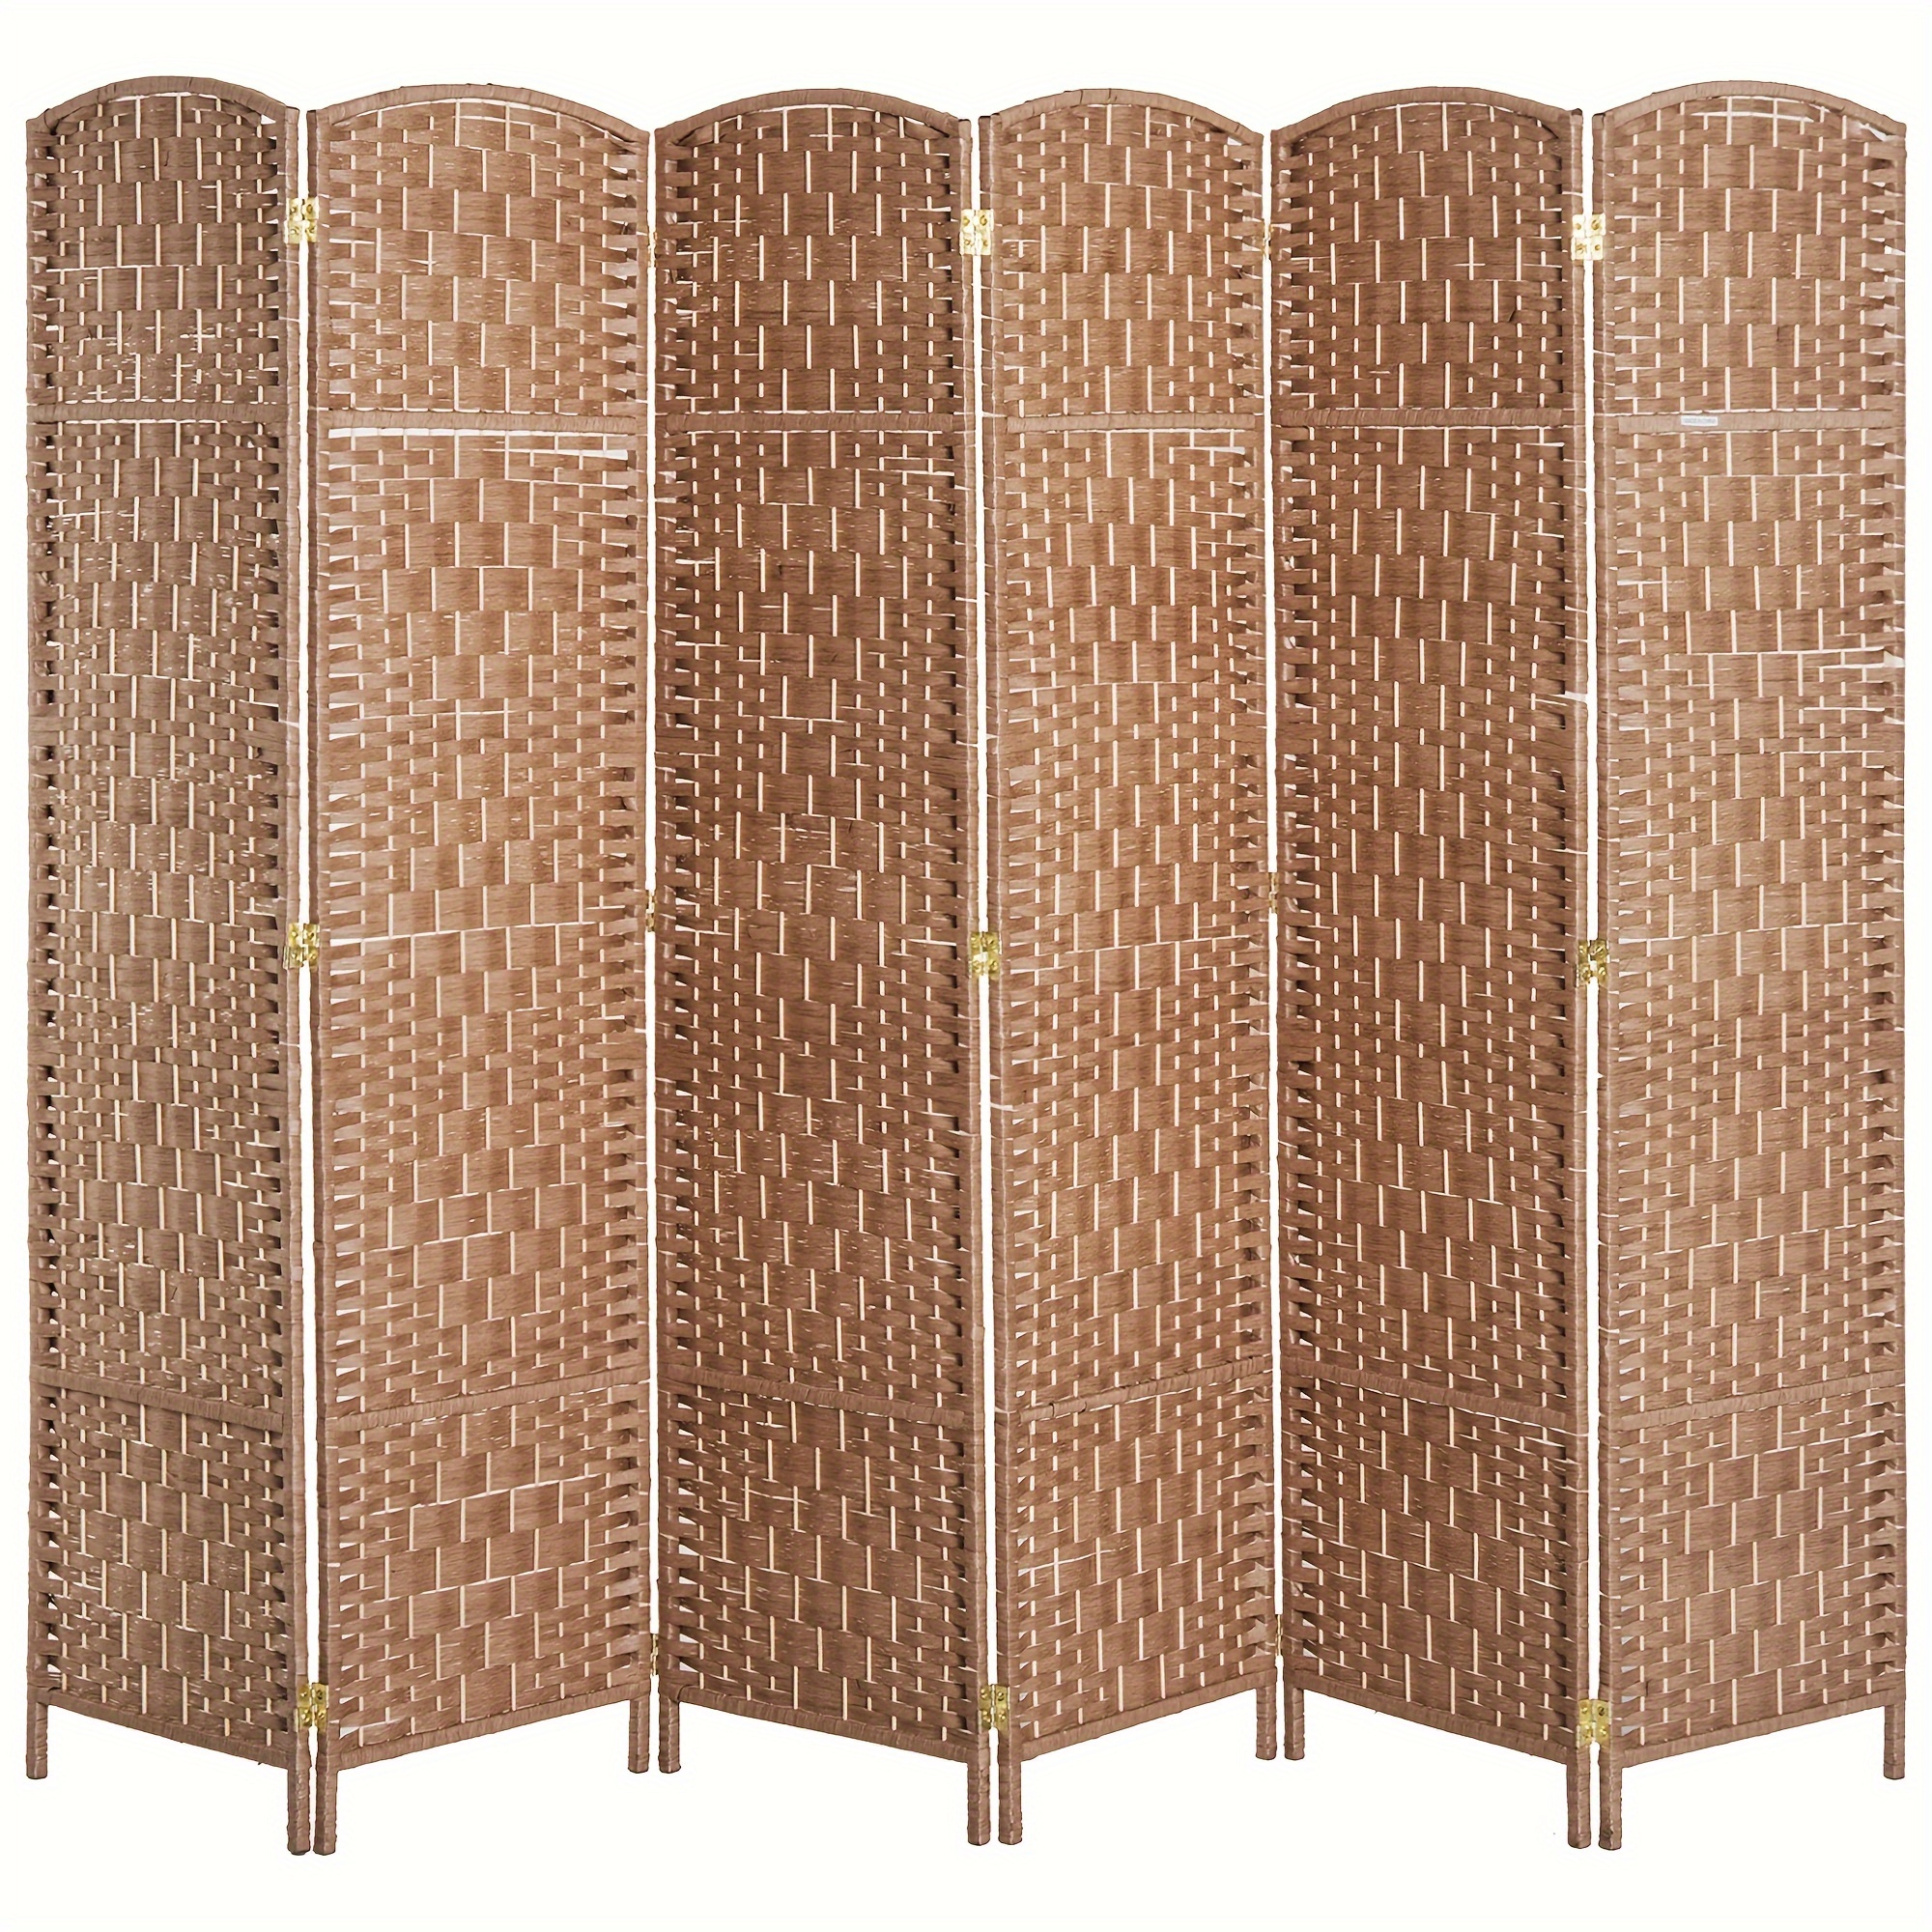 

Room Divider 6 Panels Folding Privacy Screen 6ft Tall Portable Wicker Weave Partition Wall Divider For Bedroom Home Office